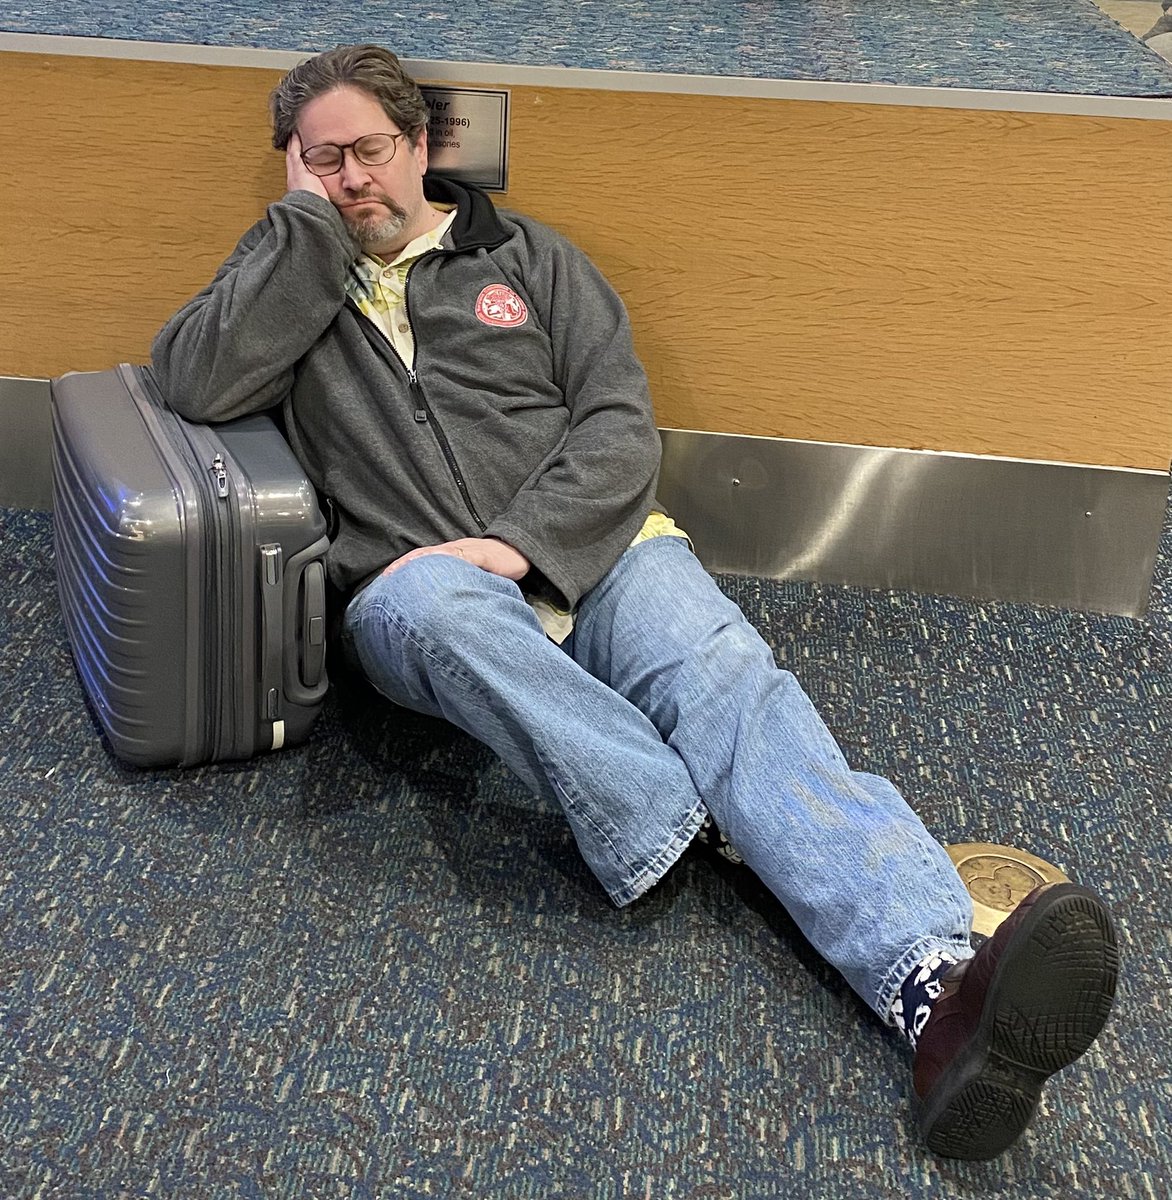 Exhausted after a long #EAST2024 meeting. Just resting my eyes near “The Traveller” in the Orlando Airport. 
atlasobscura.com/places/the-tra…